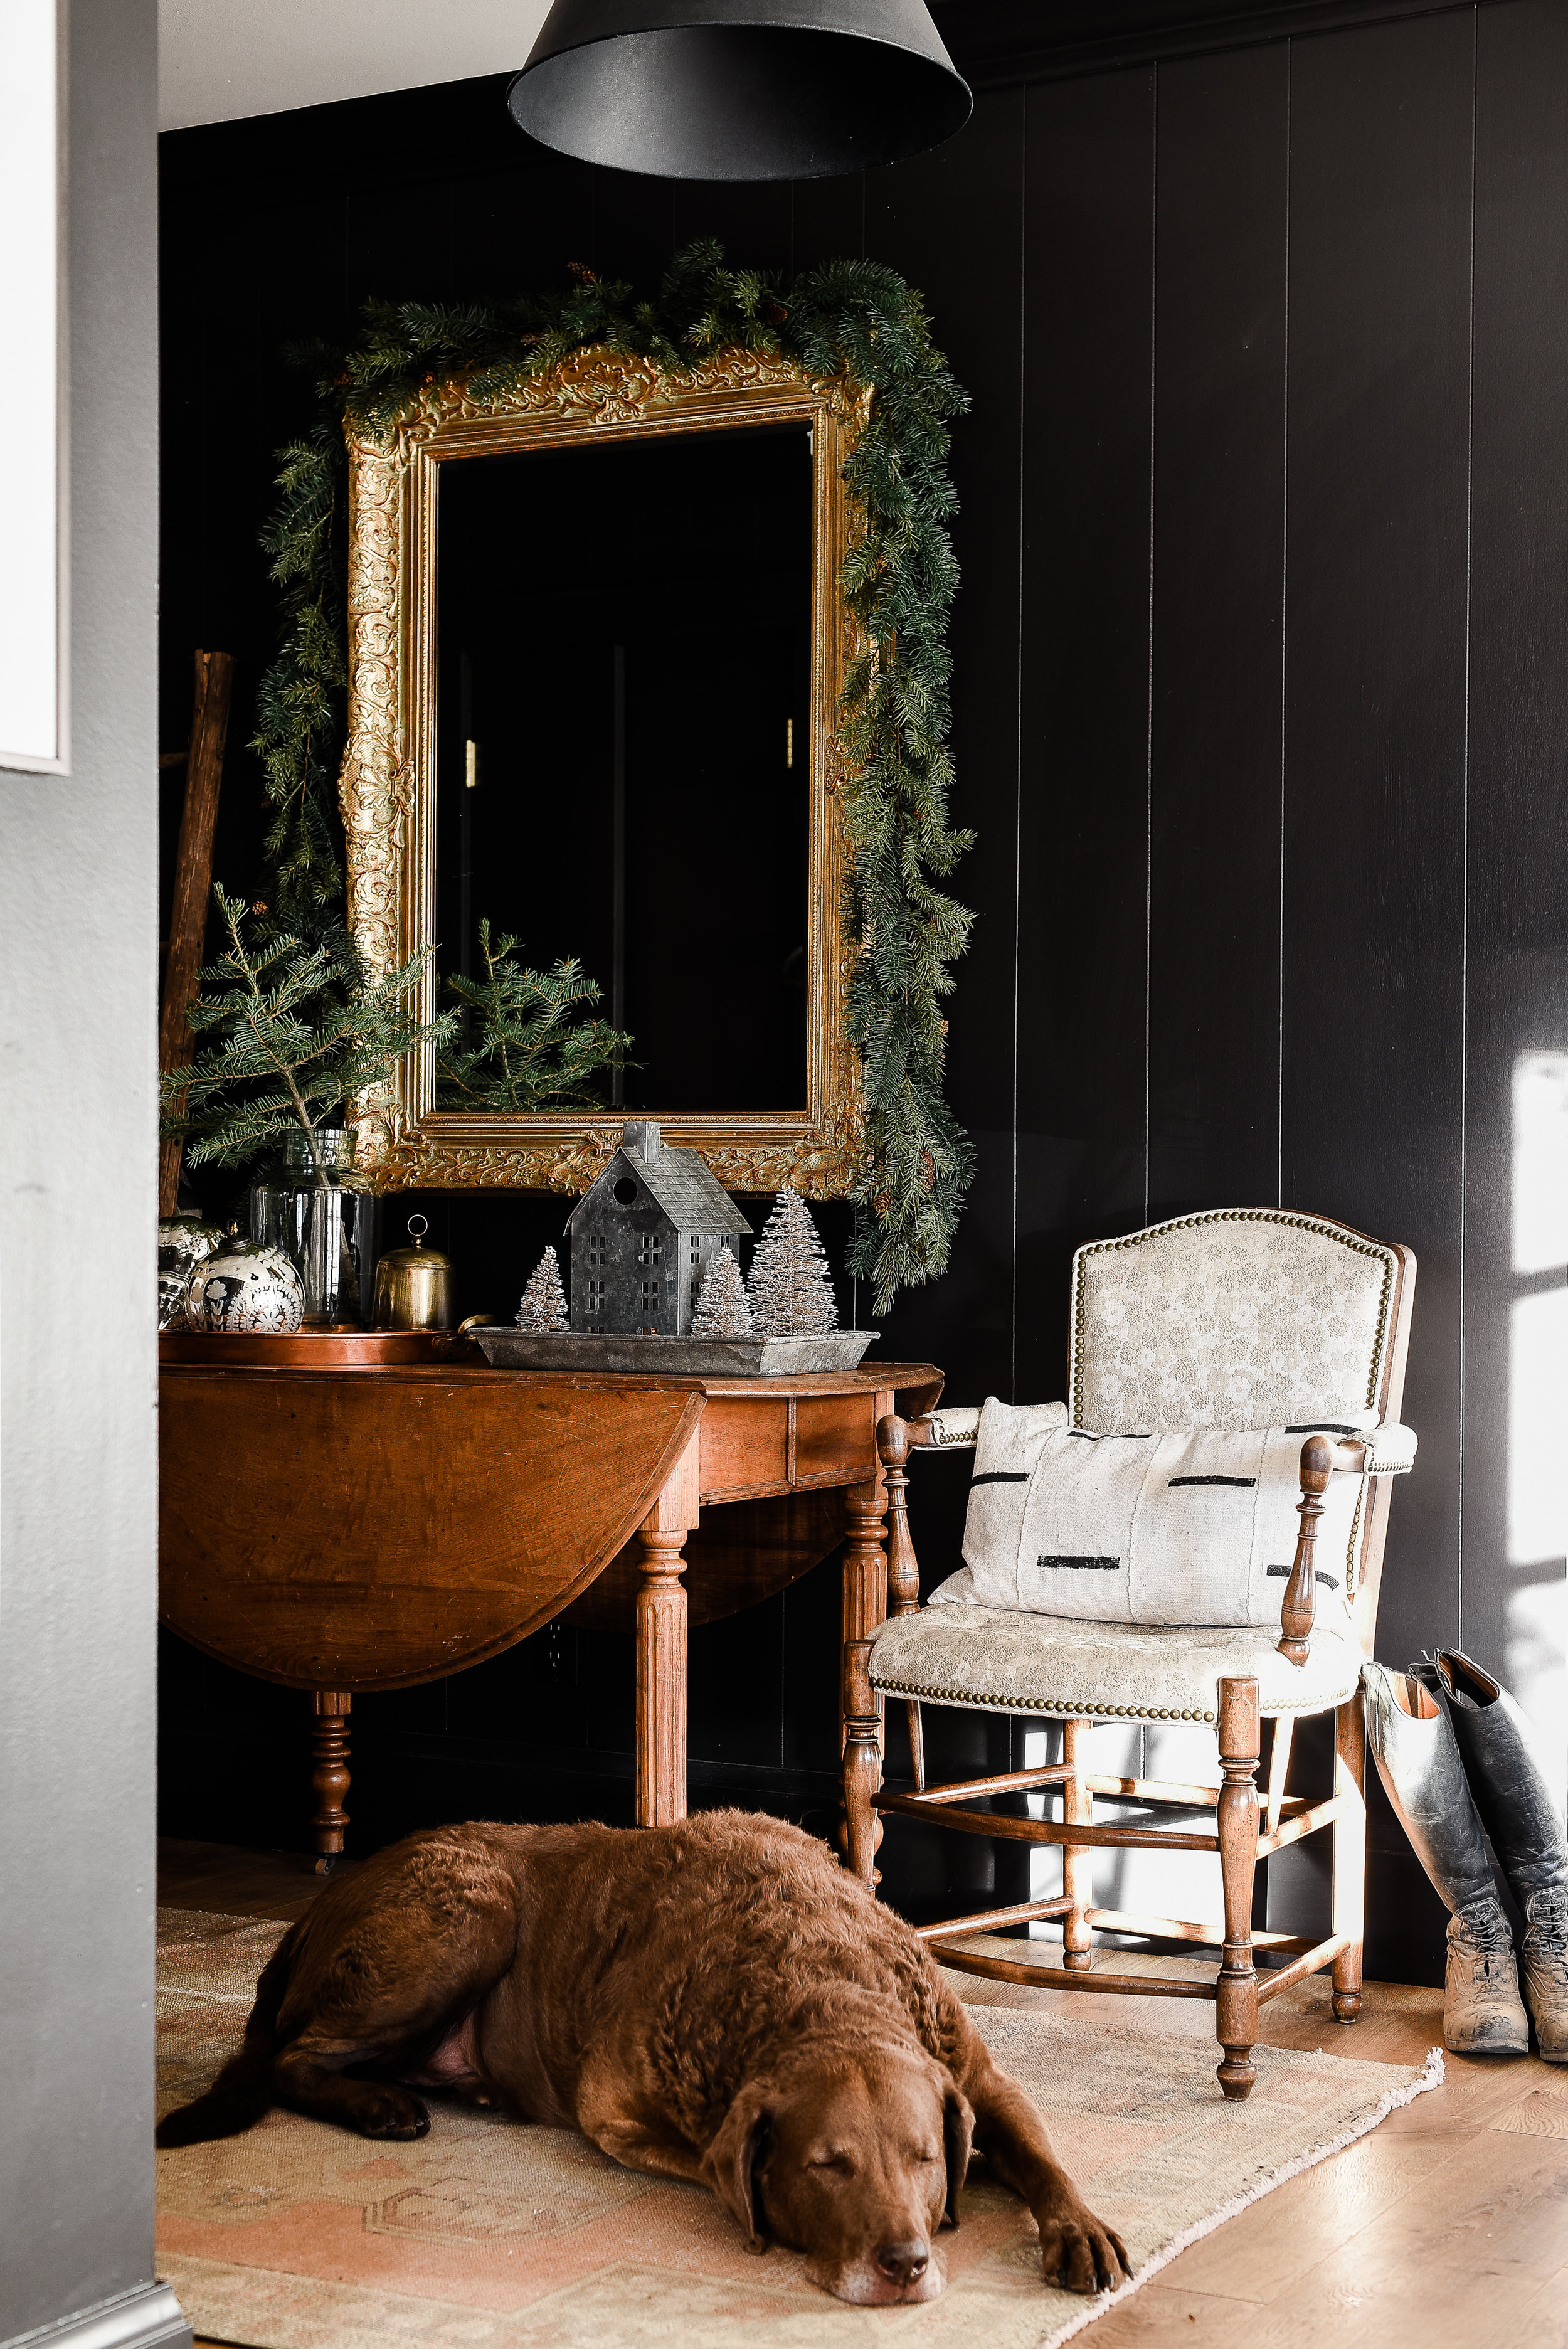 Stop by for a Christmas home tour showcasing the homes of over ten farmhouse bloggers! Get inspired this year with beautiful & unique ideas to decorate your home for Christmas!